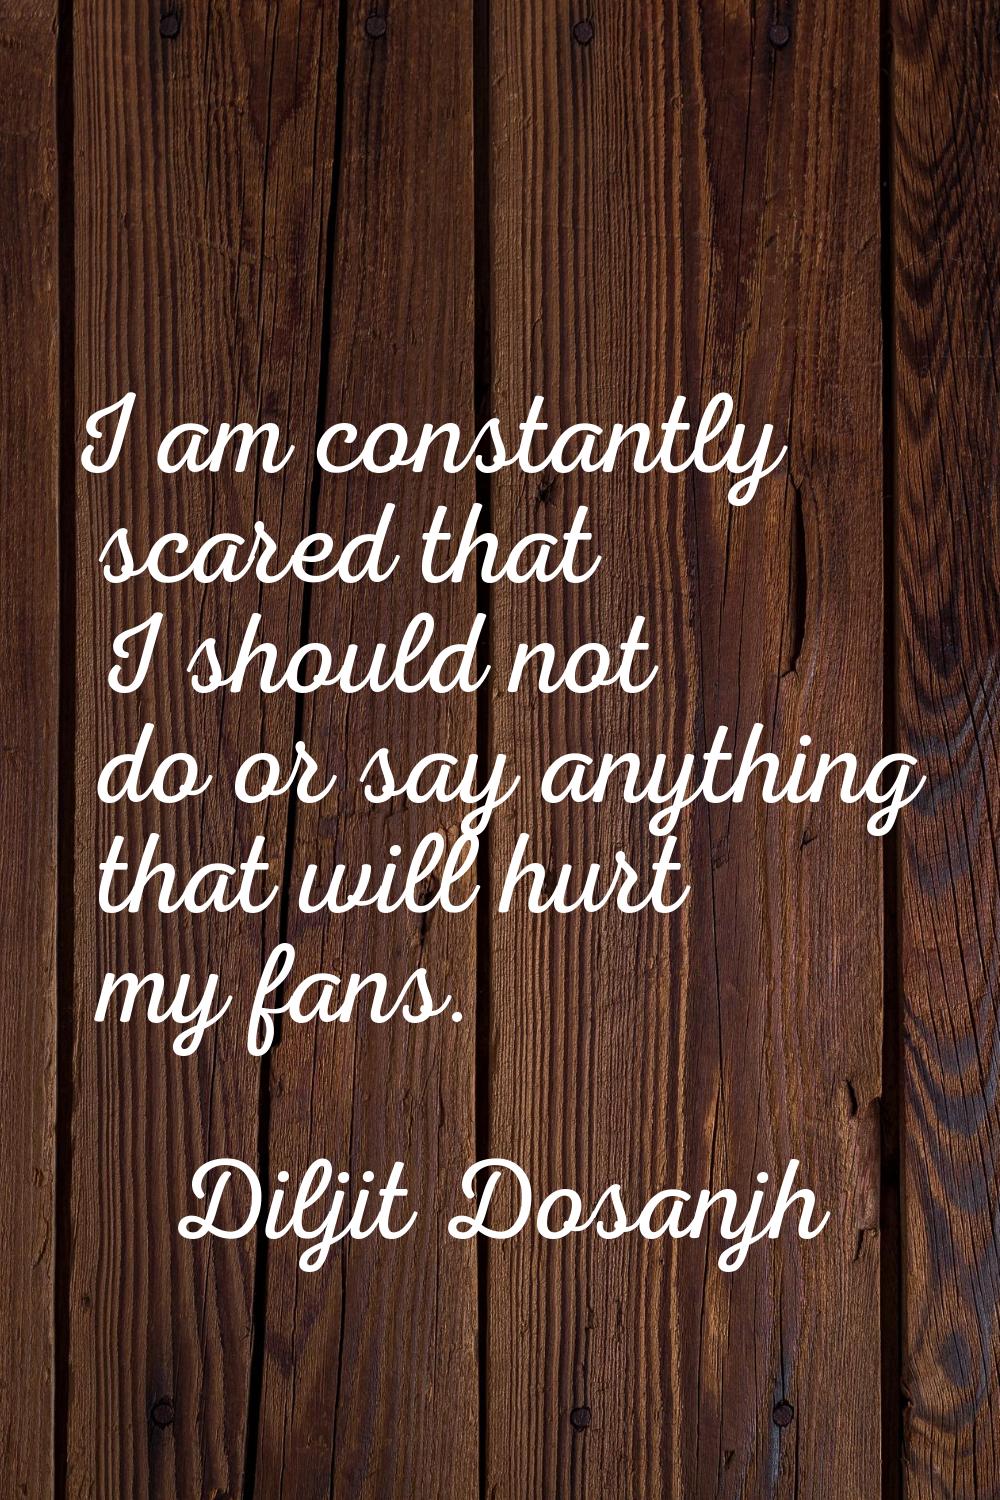 I am constantly scared that I should not do or say anything that will hurt my fans.